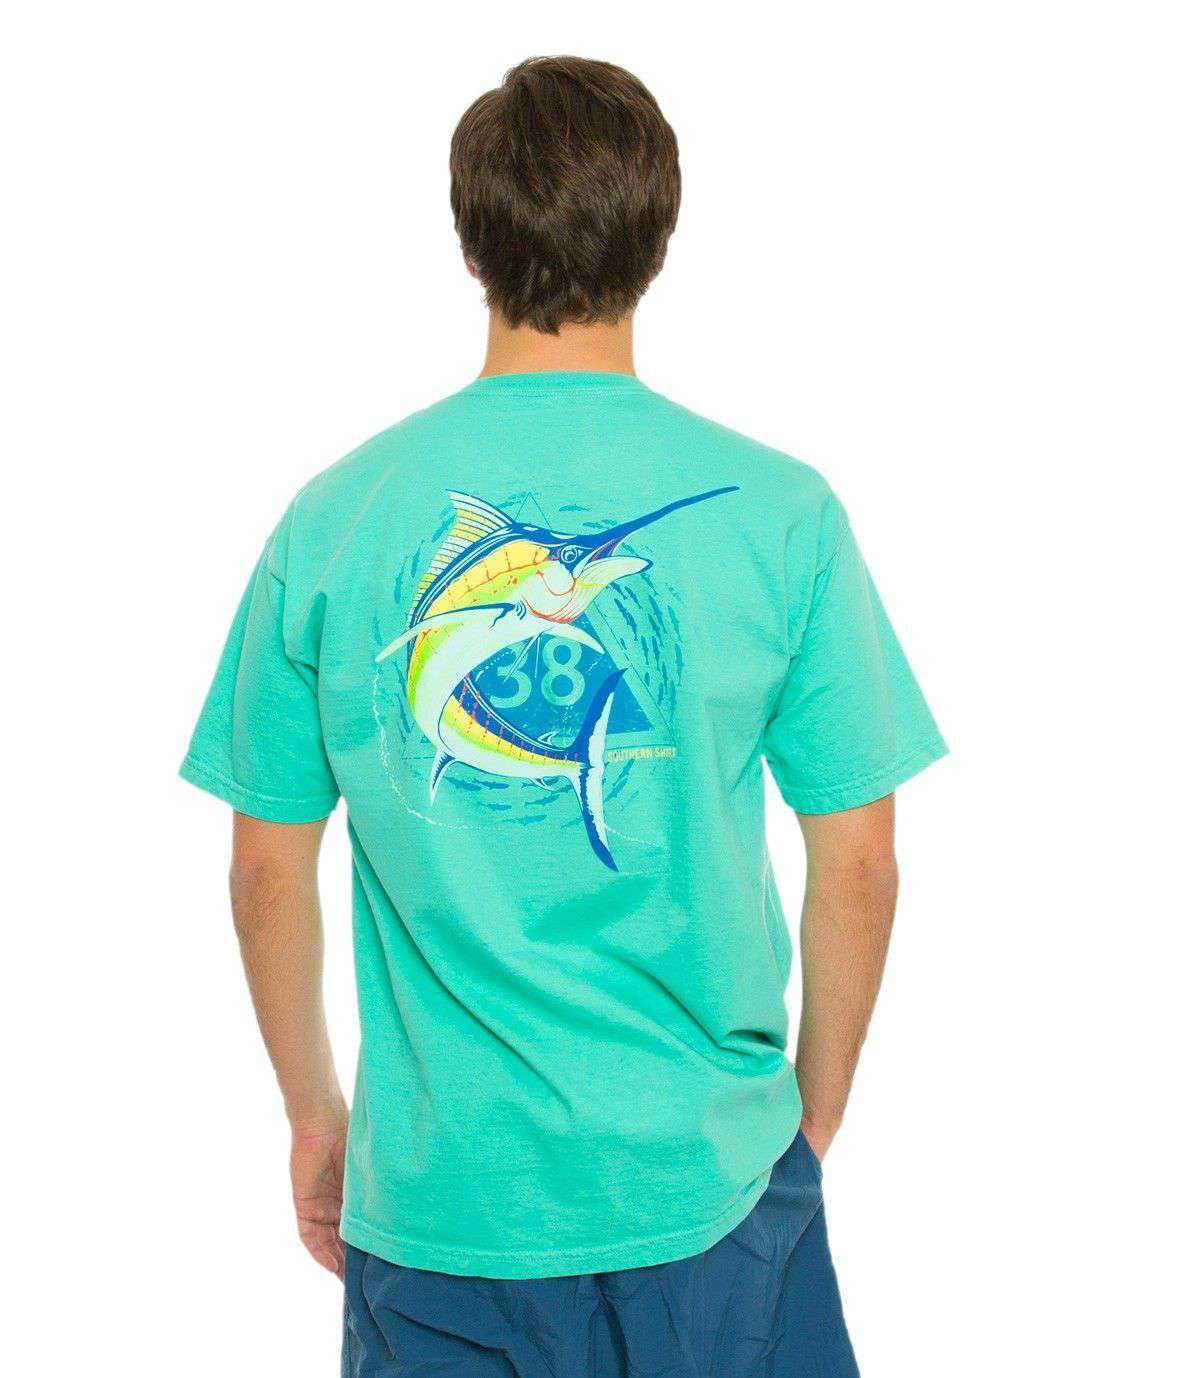 Marlin Marker Tee in Mojito by The Southern Shirt Co. - Country Club Prep